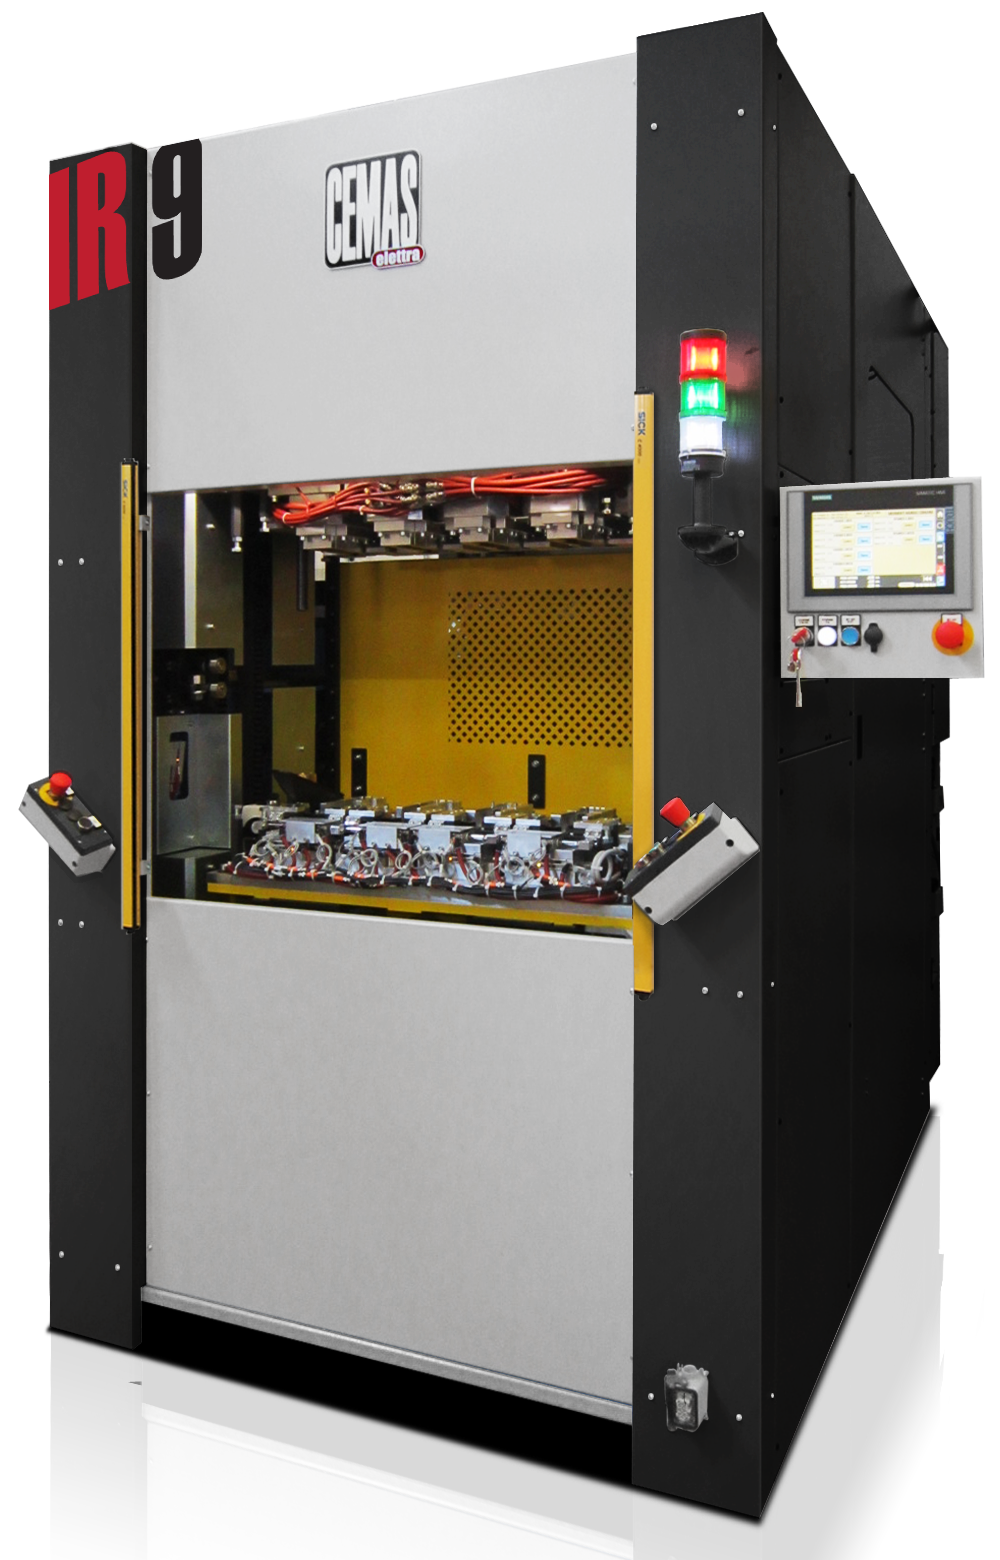 Manufacturers of High Performance Infrared Welding Machines UK